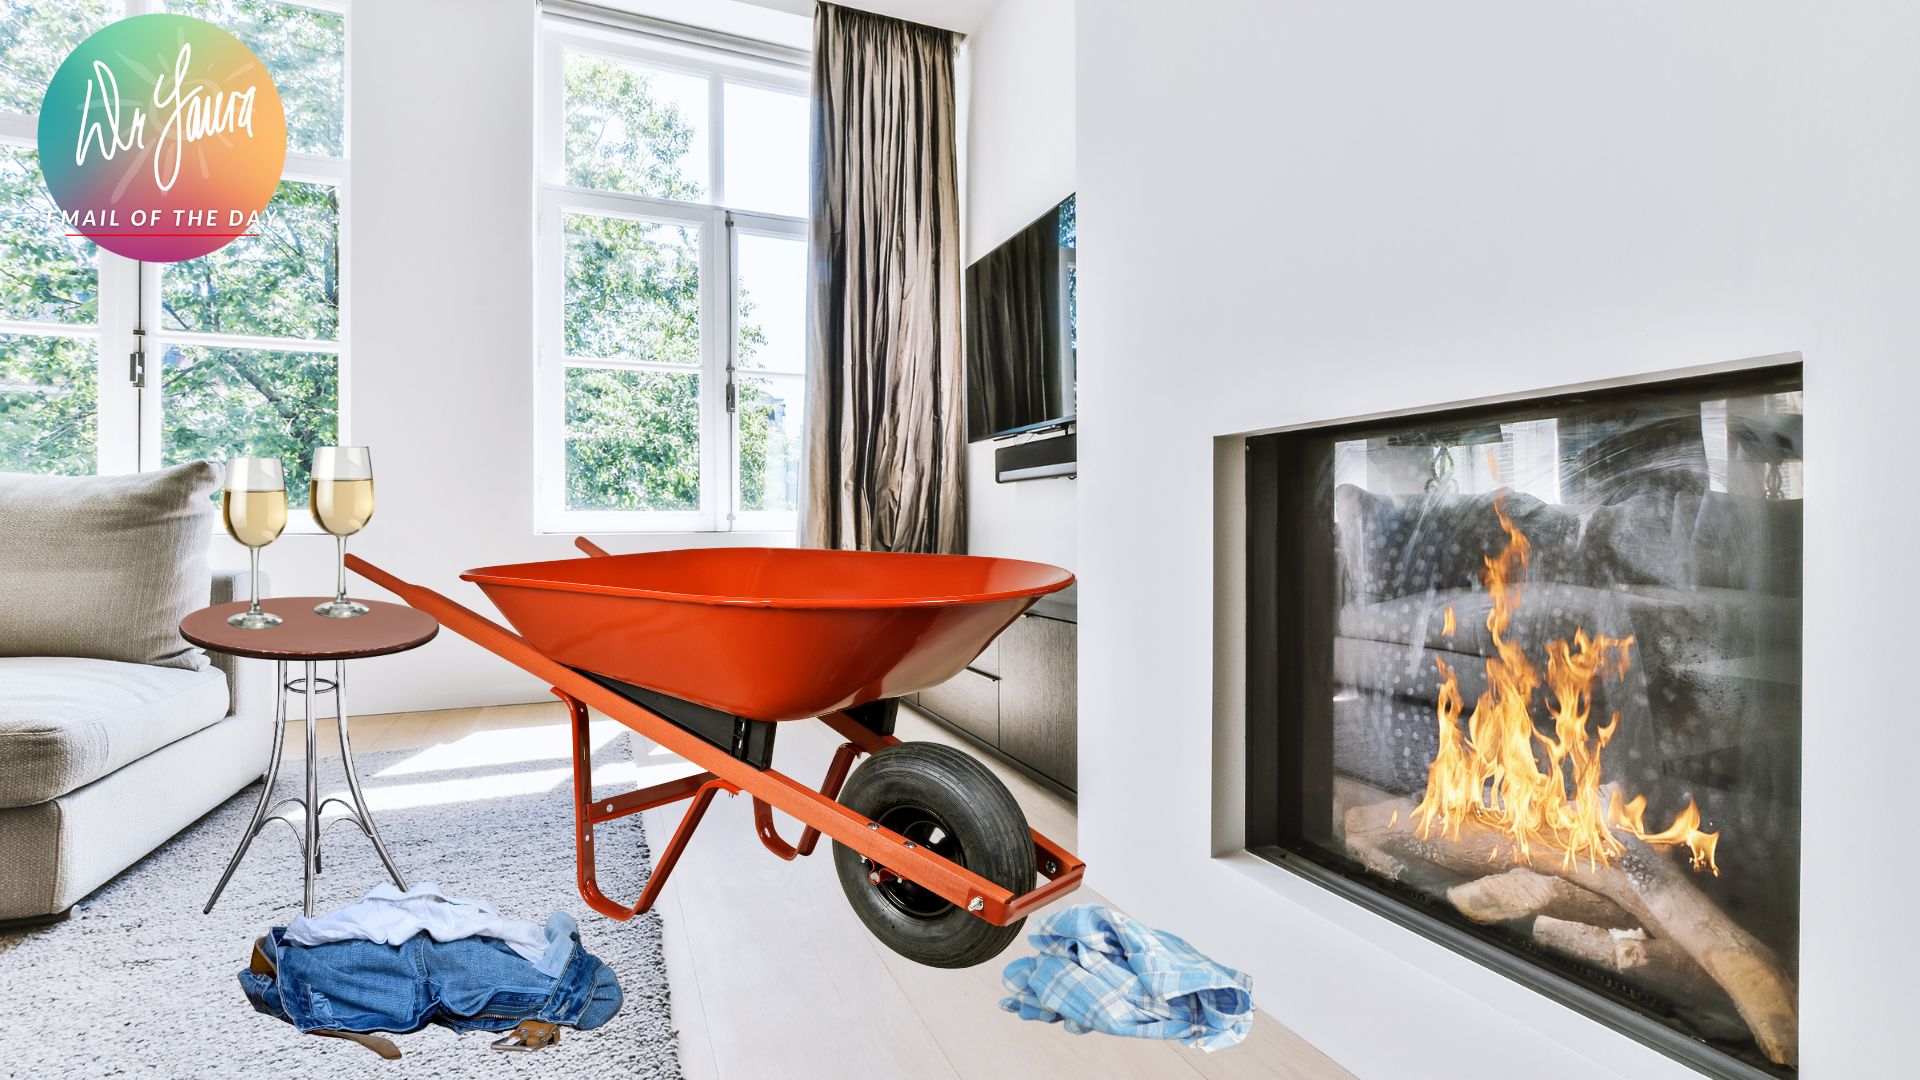 Red wheelbarrow sits in a living room with several articles of clothing lay on the ground